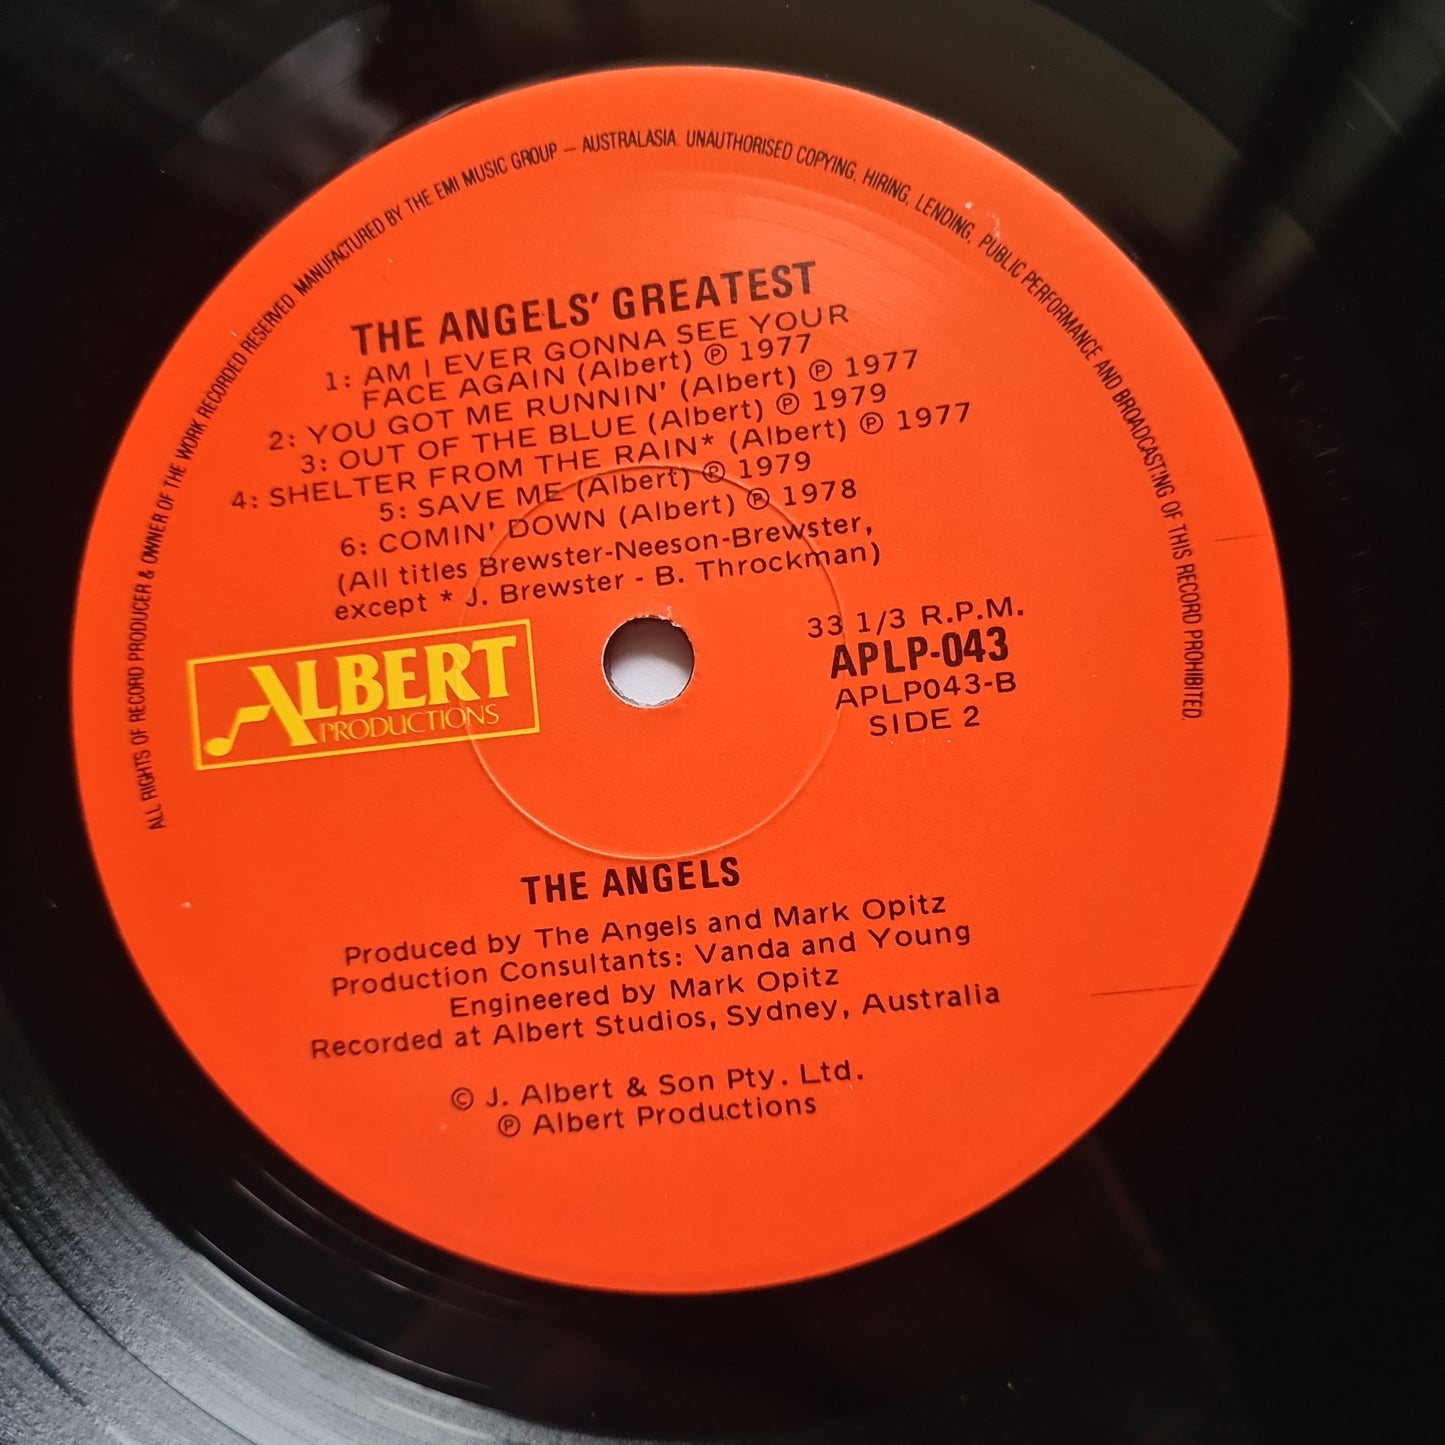 The Angels – The Angels Greatest - 1980 (1987 Red Label- Near Mint looks unplayed) - Vinyl Record